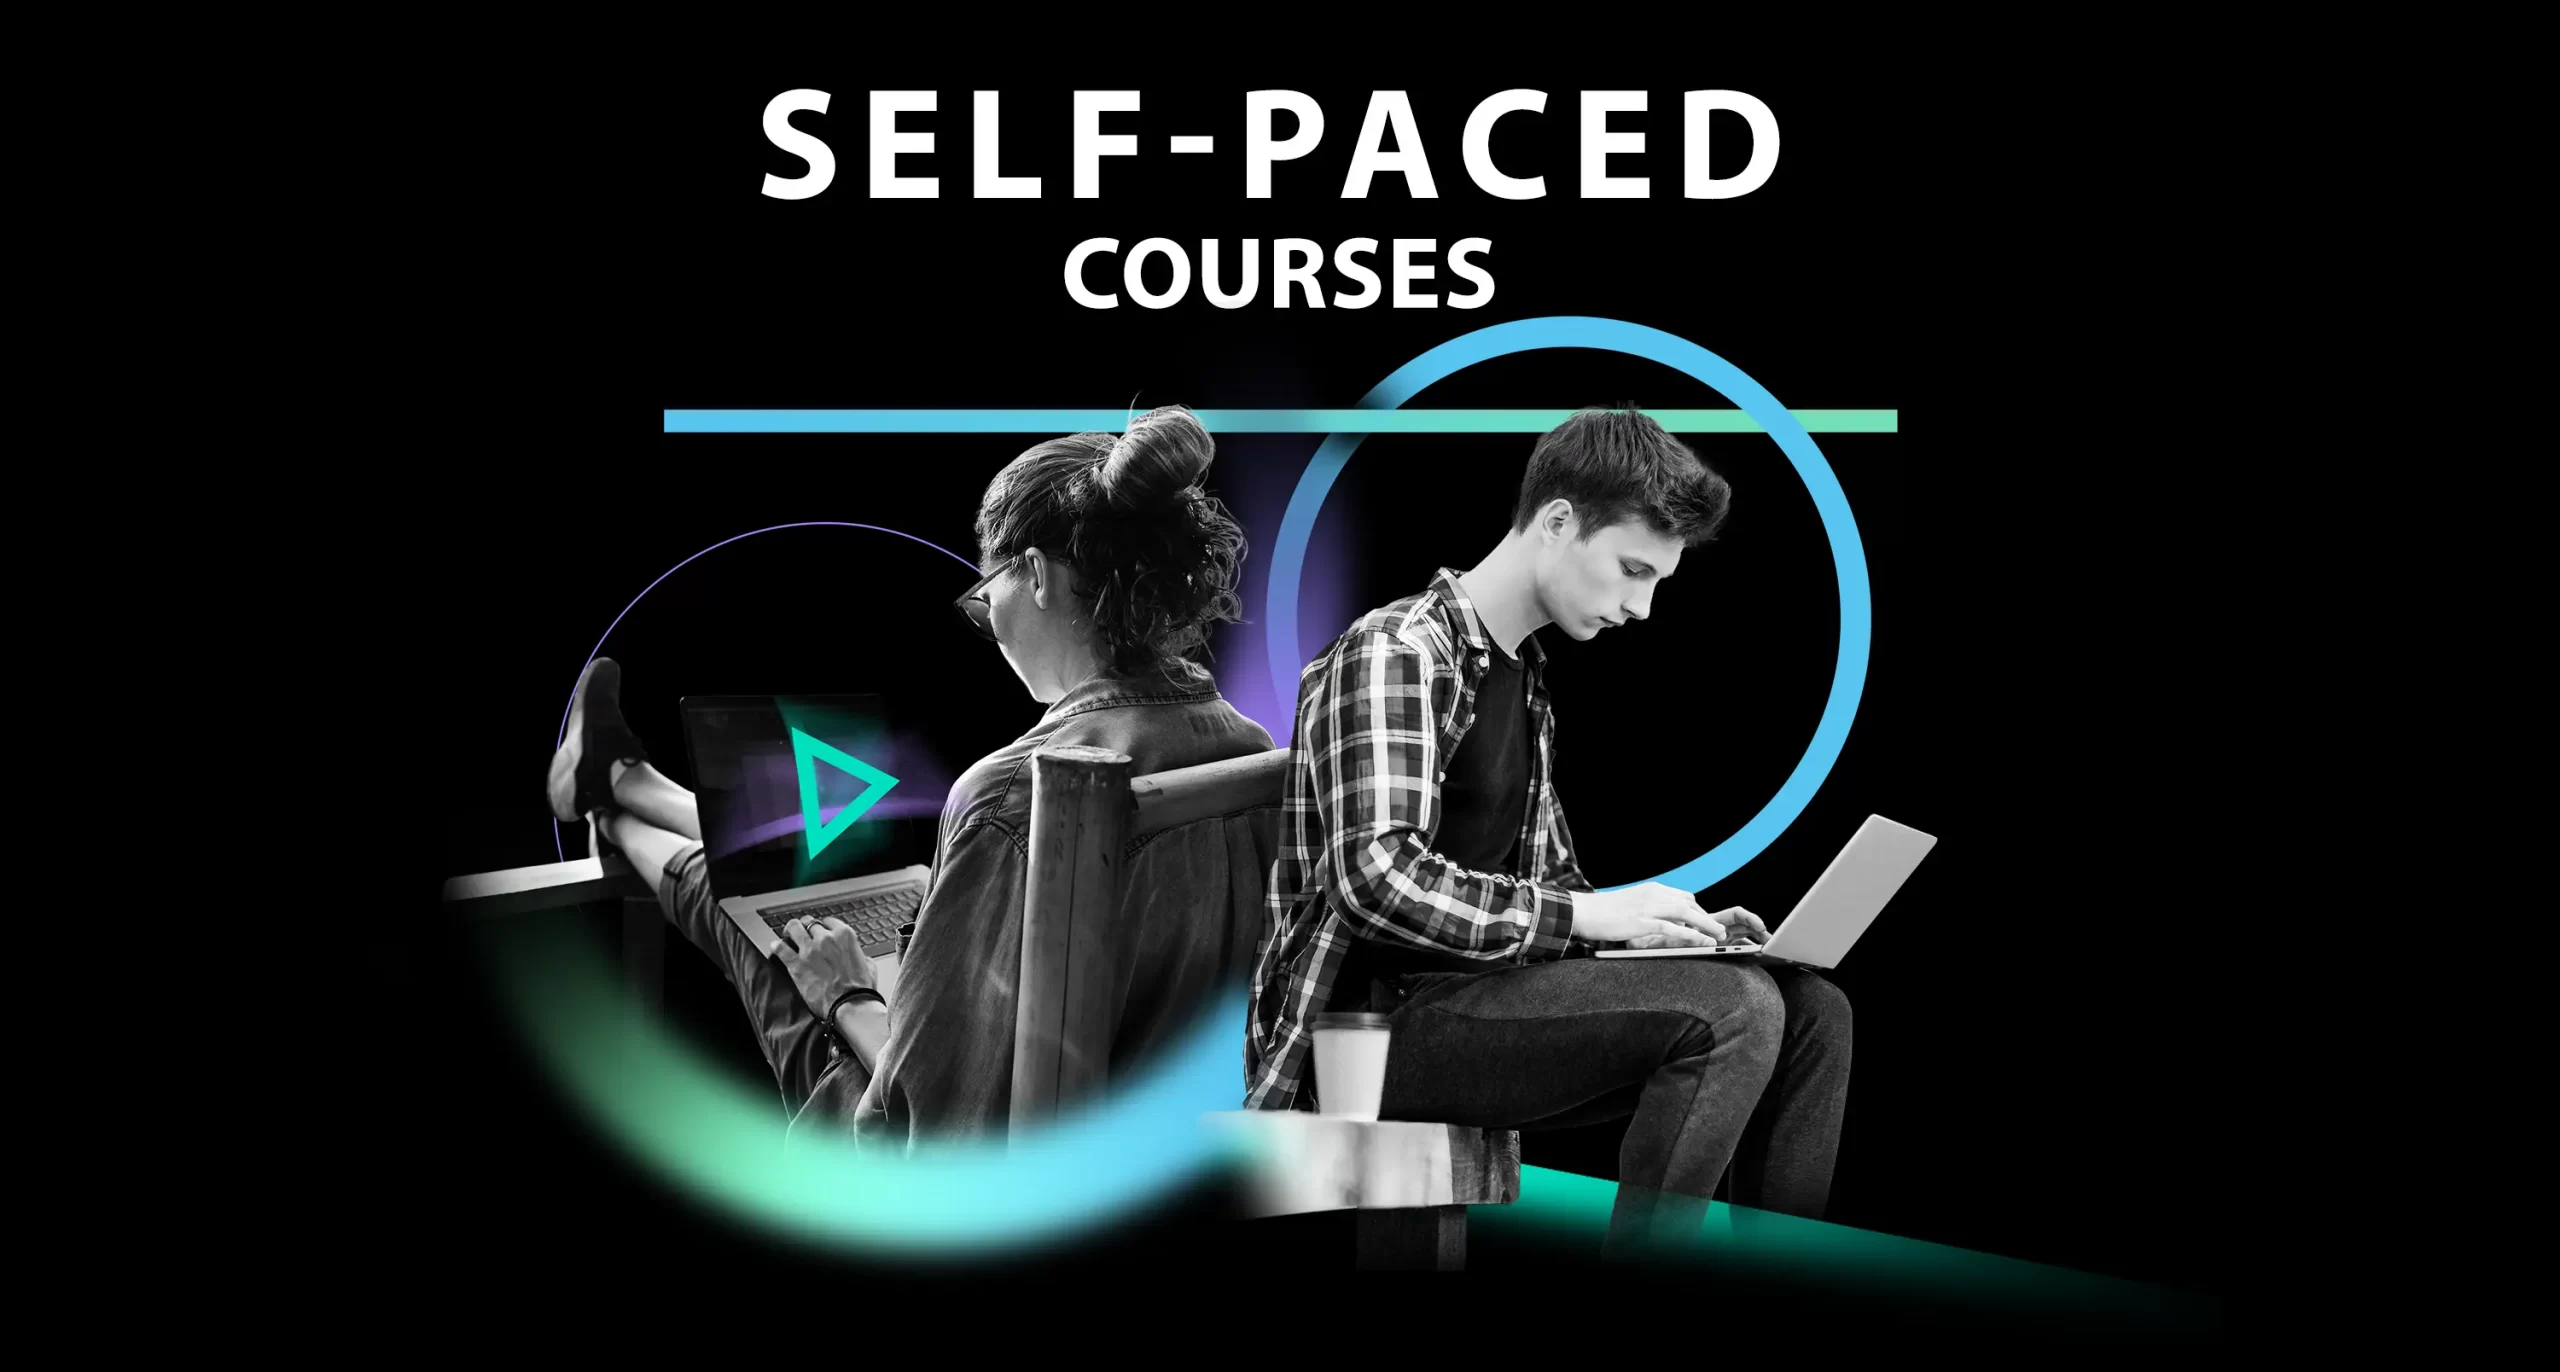 Self-Paced Courses - image collage